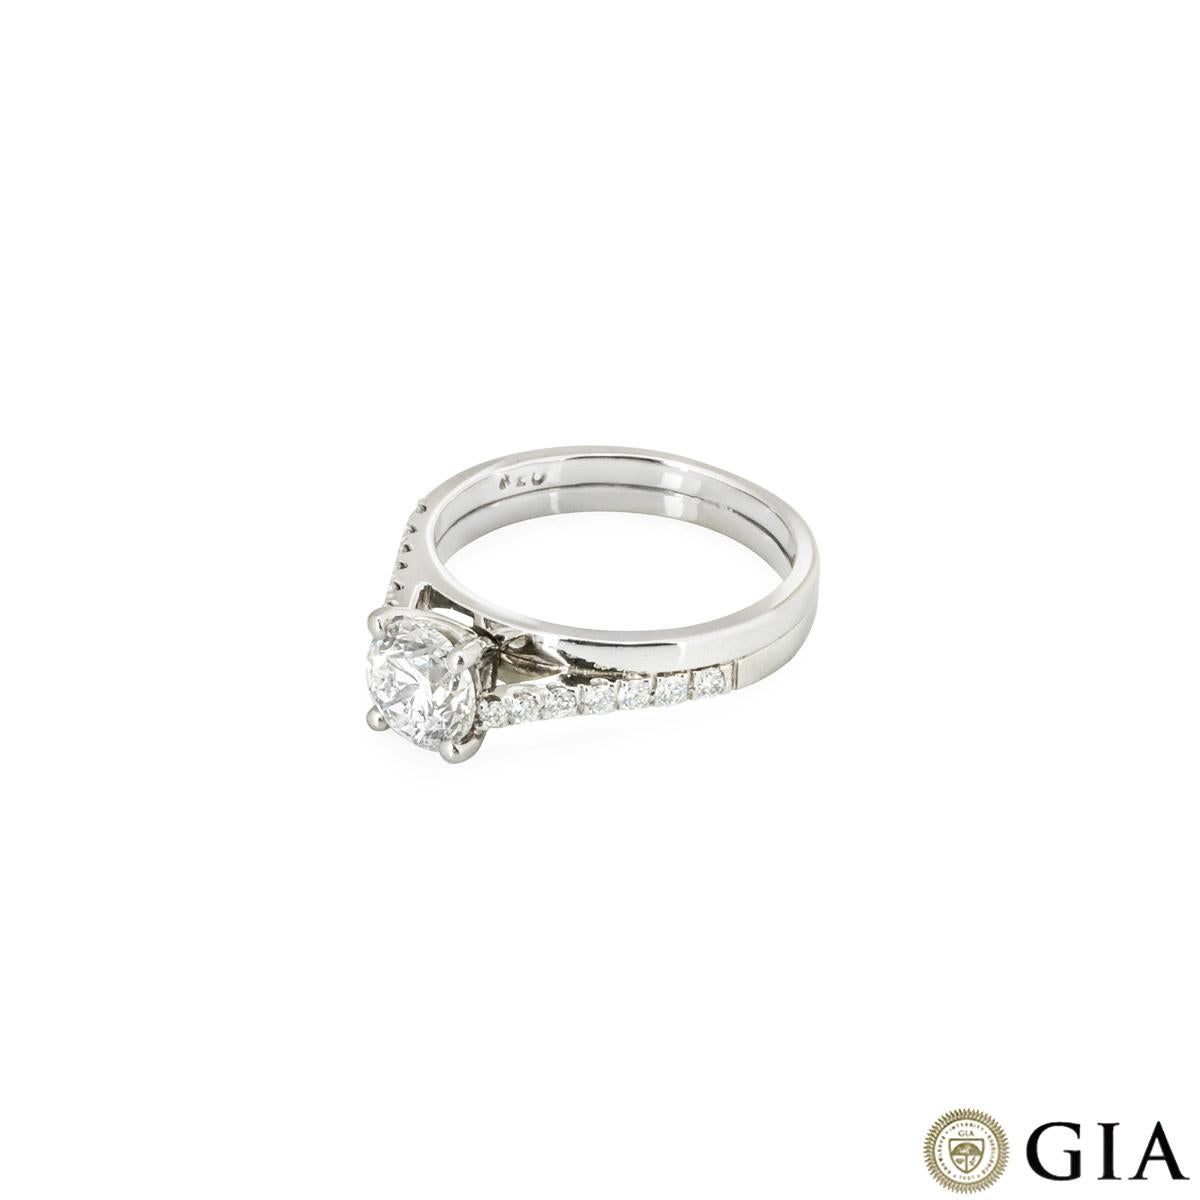 GIA Certified Platinum Round Brilliant Cut Diamond Ring 1.02ct E/SI2 In Excellent Condition For Sale In London, GB